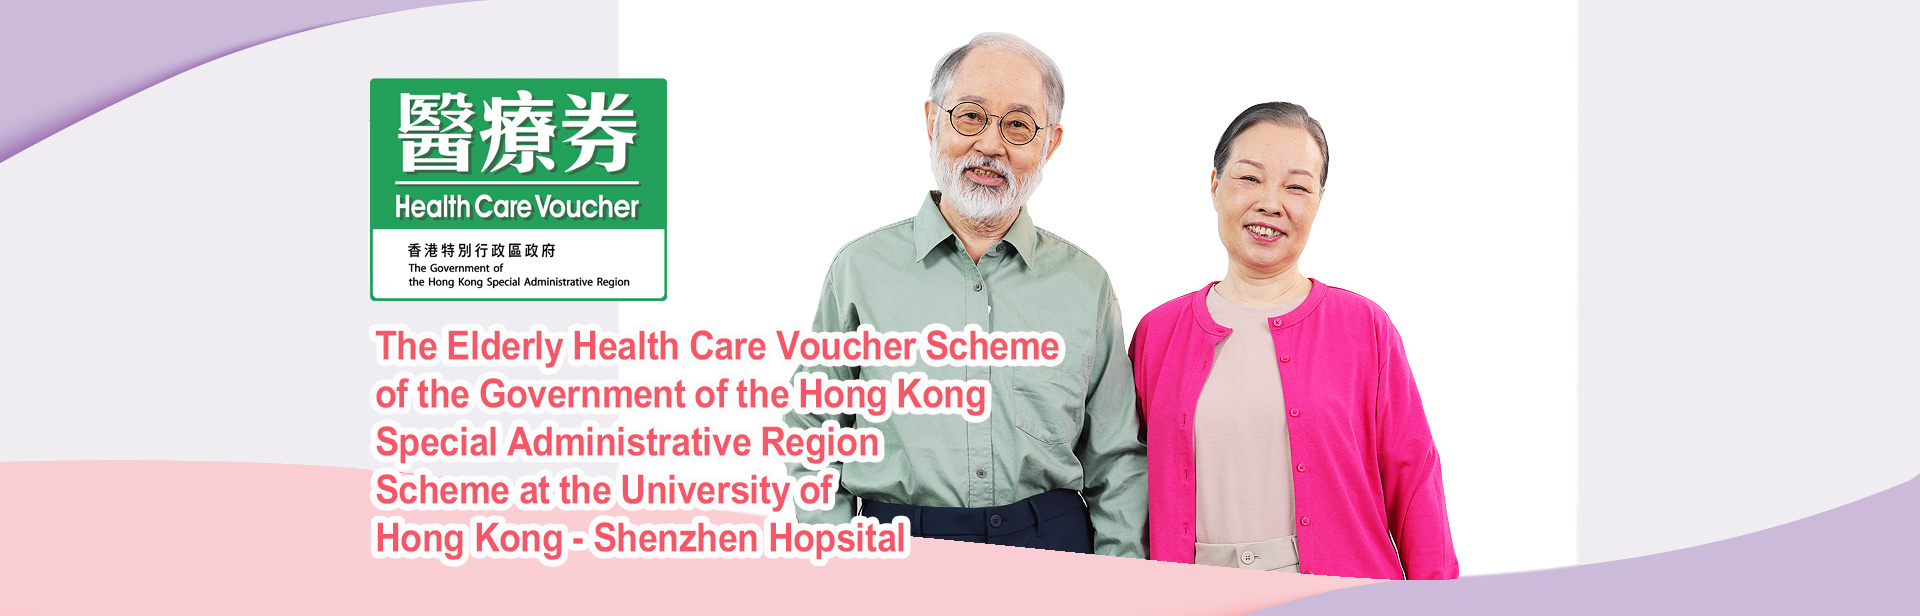 The Elderly Health Care Voucher Scheme of the Government of the Hong Kong Special Administrative Region - Scheme at the University of Hong Kong - Shenzhen Hopsital